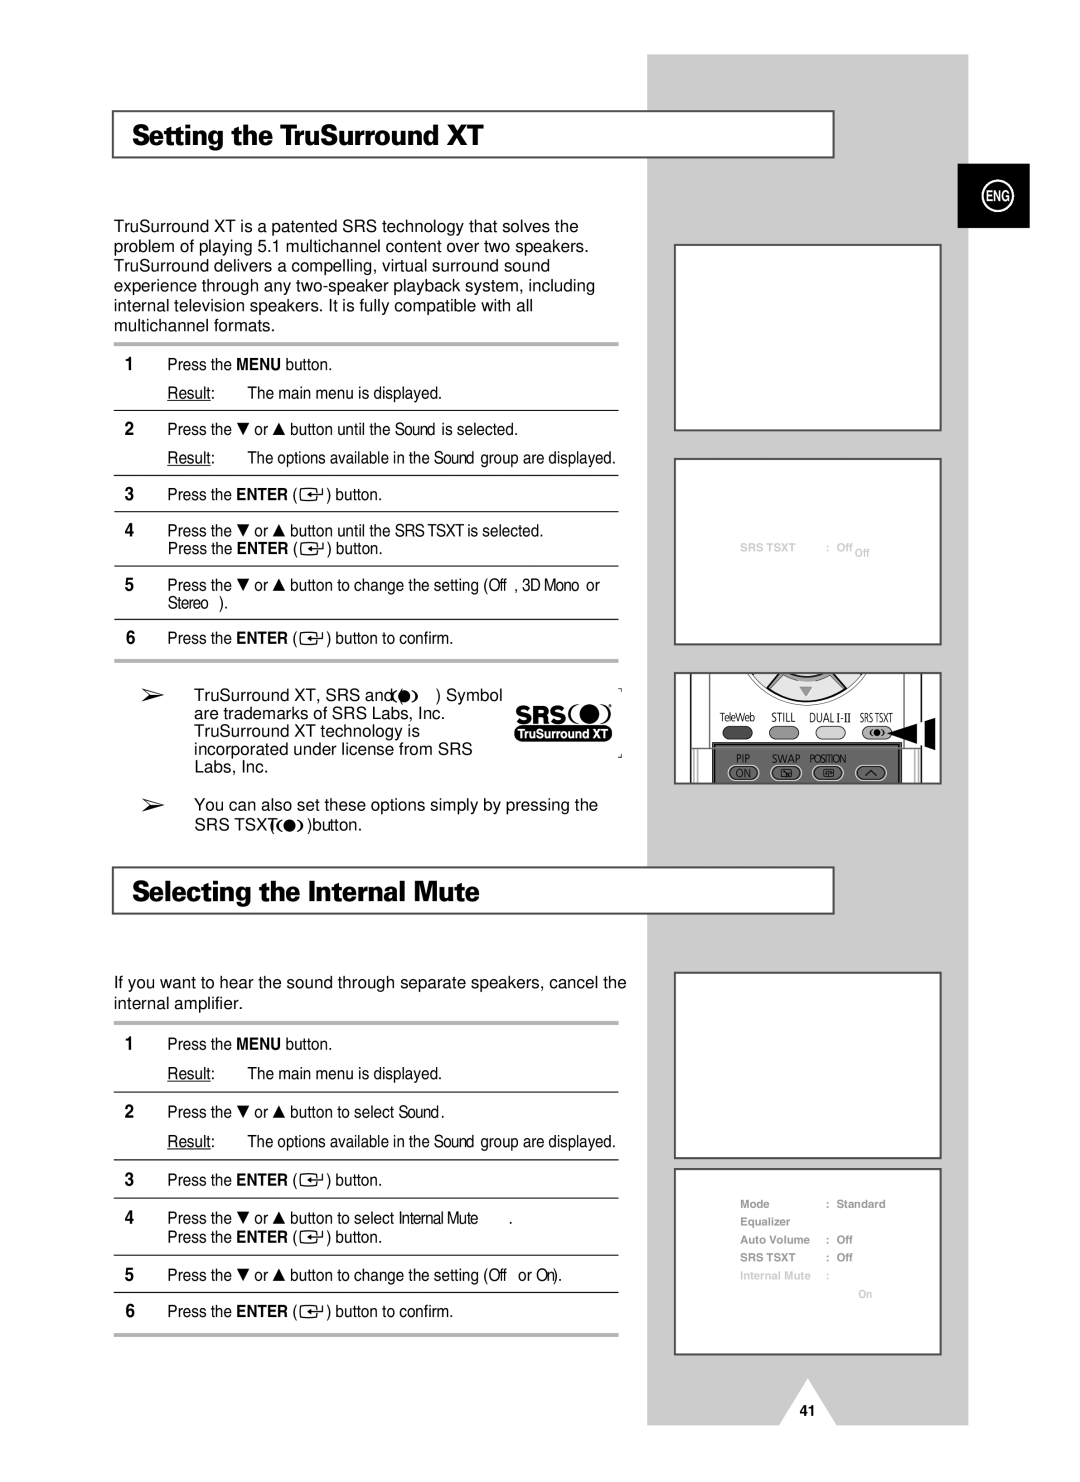 Samsung PS-37S4A manual Setting the TruSurround XT, Selecting the Internal Mute, Stereo 